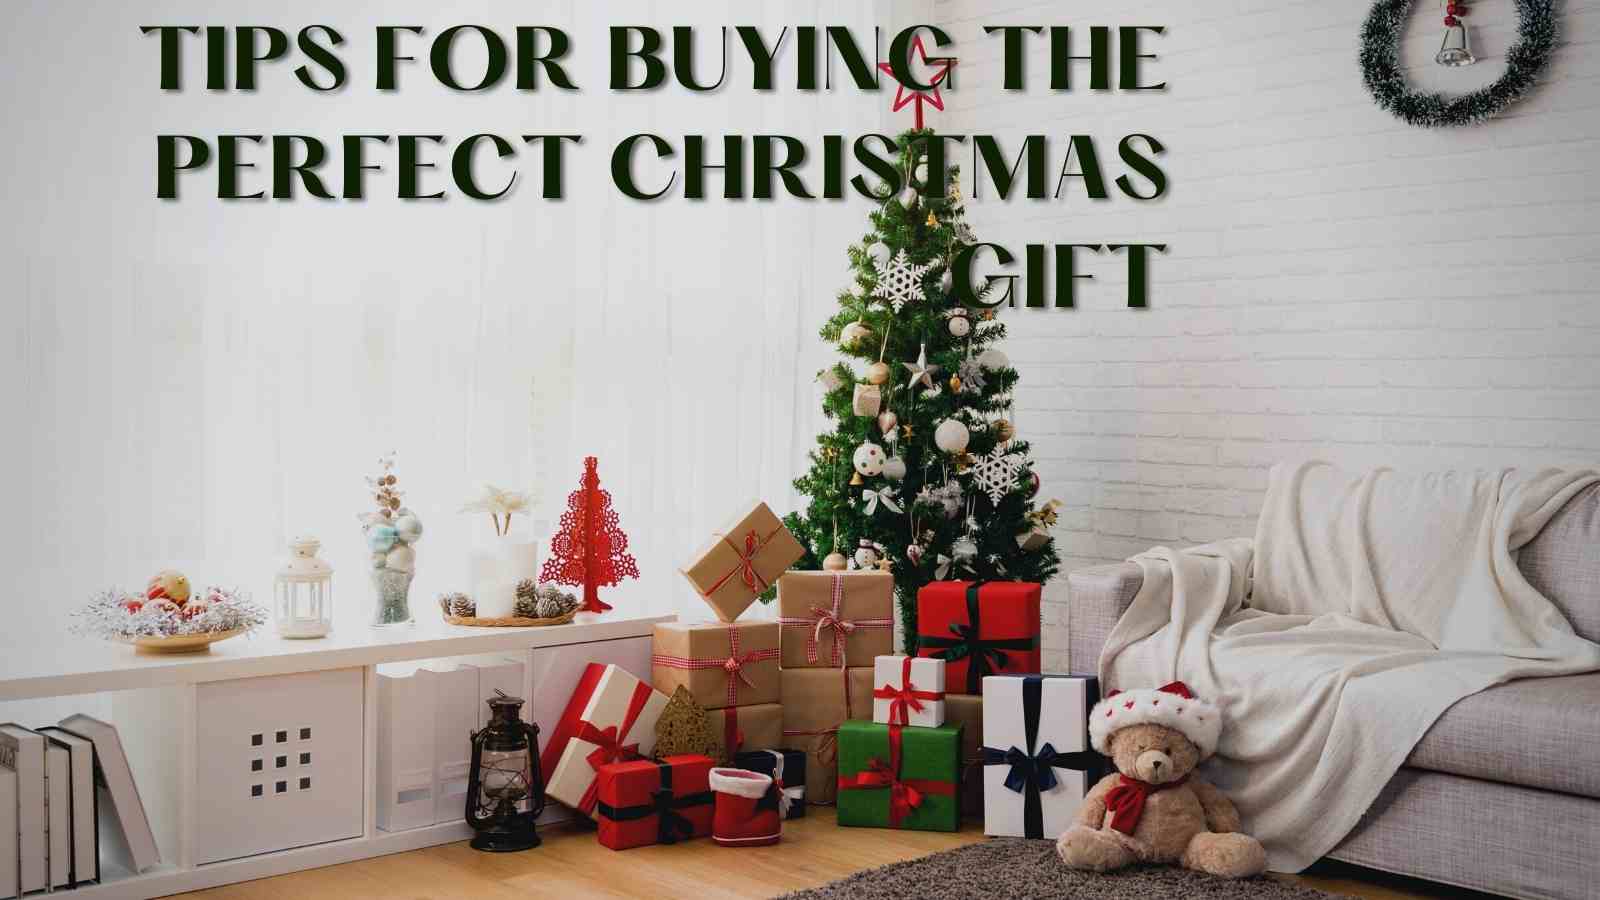 Tips For Buying the Perfect Christmas Gift